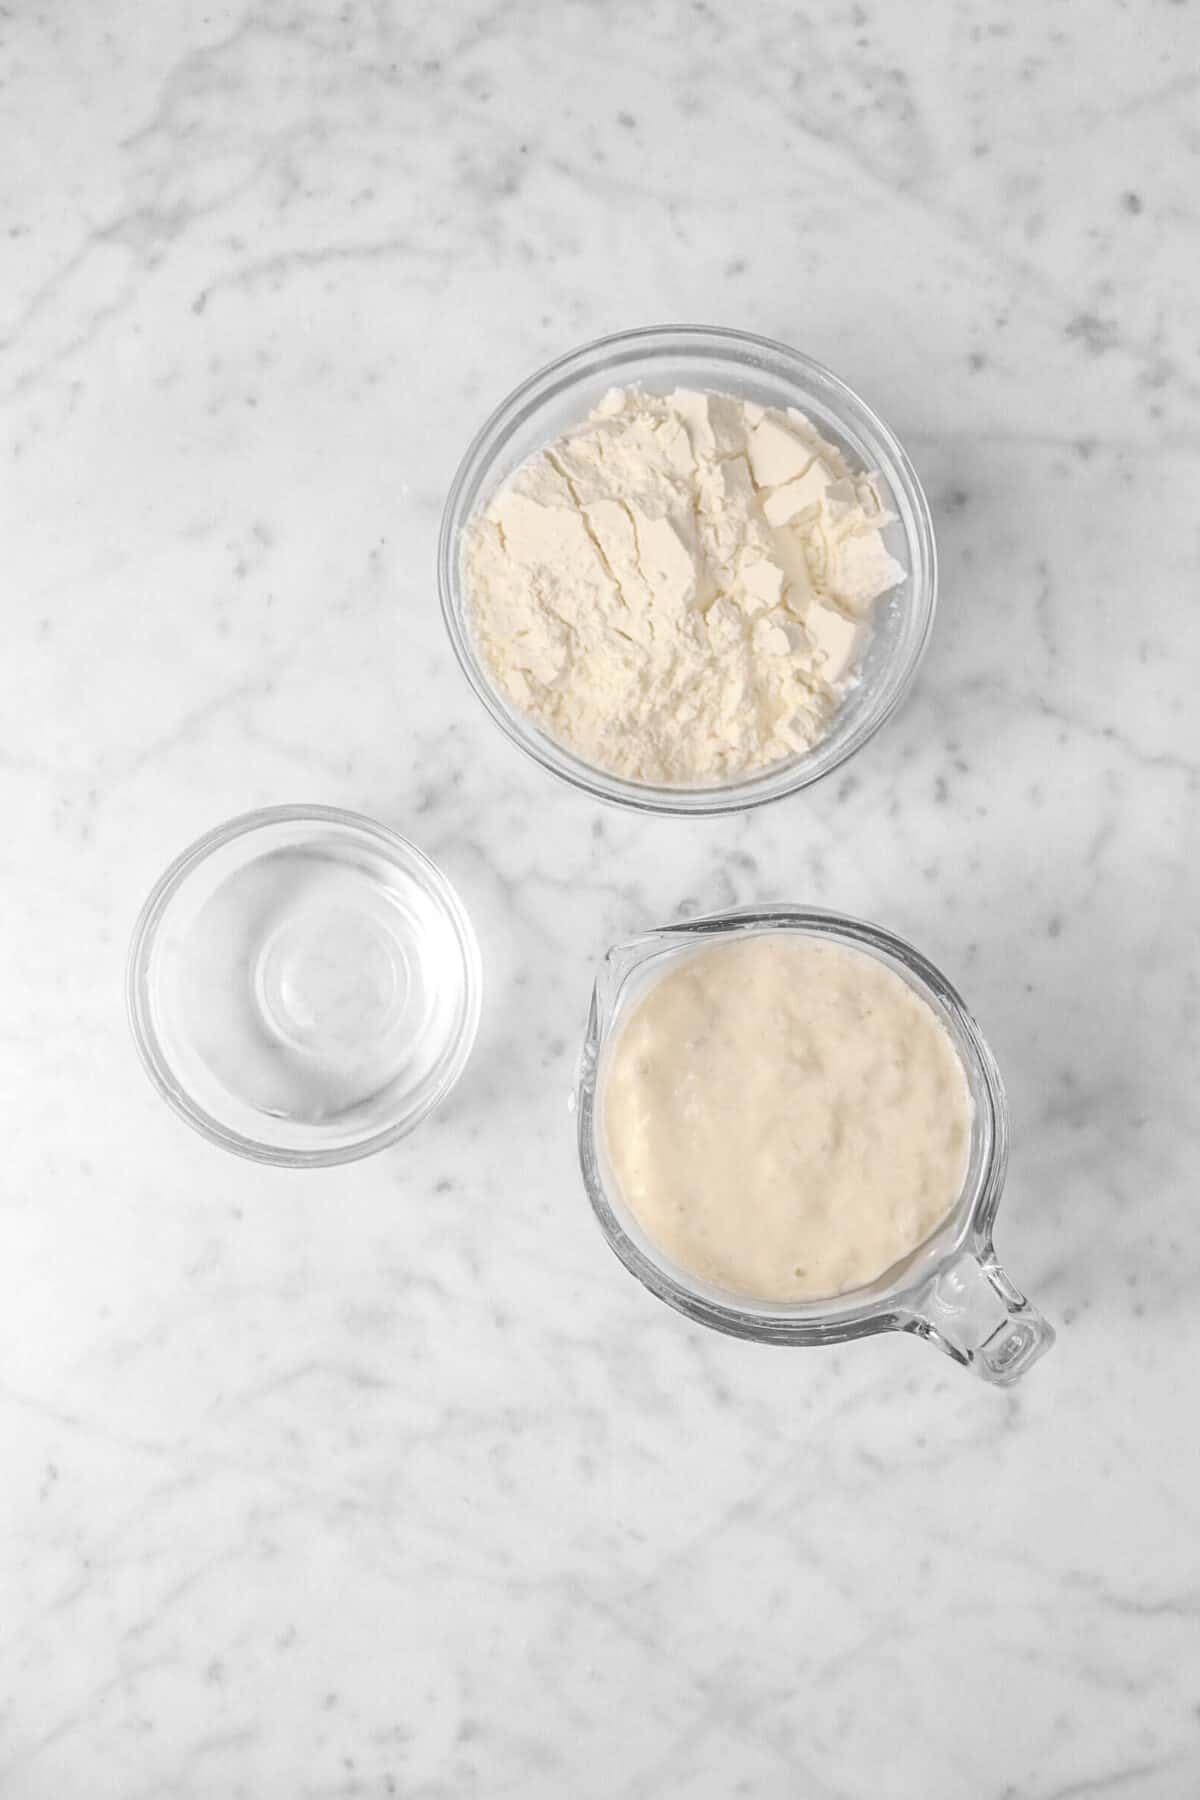 sourdough starter, flour, and water in glass bowls on a marble counter